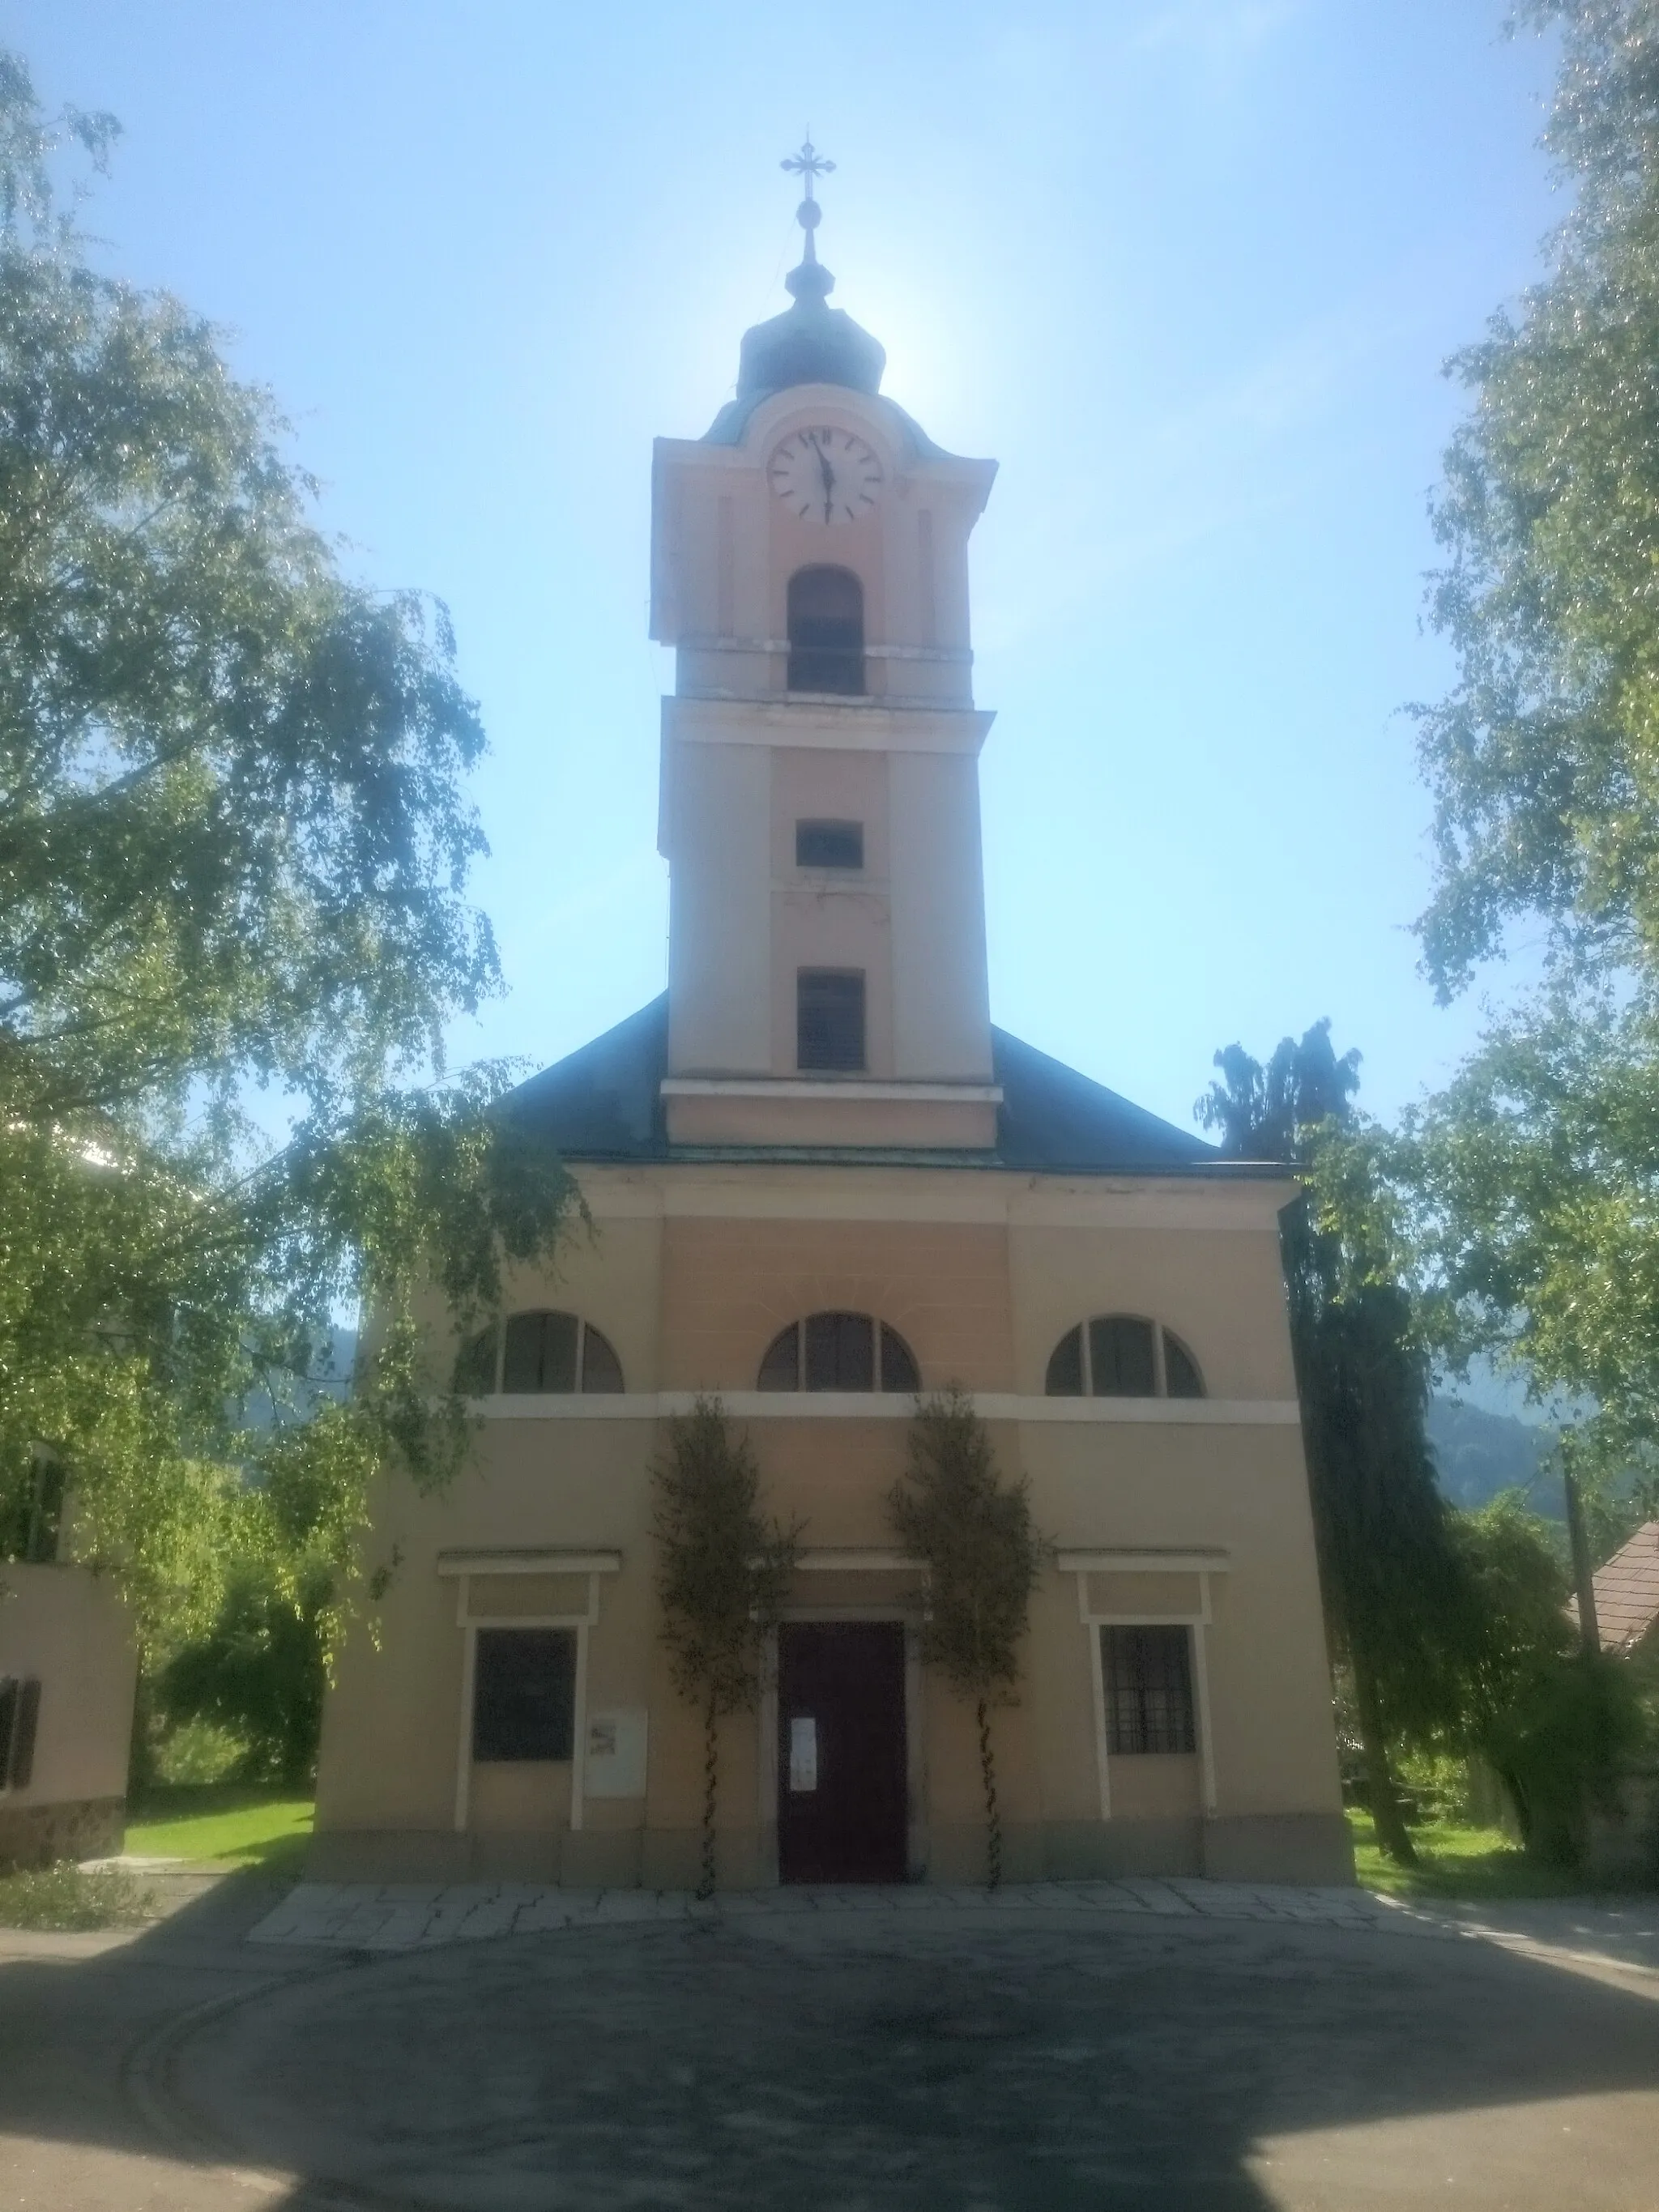 Photo showing: St James' parish church (sl: cerkev sv. Jakoba) in Mežica, the current one built in 1840. More info (in Slovenian only).